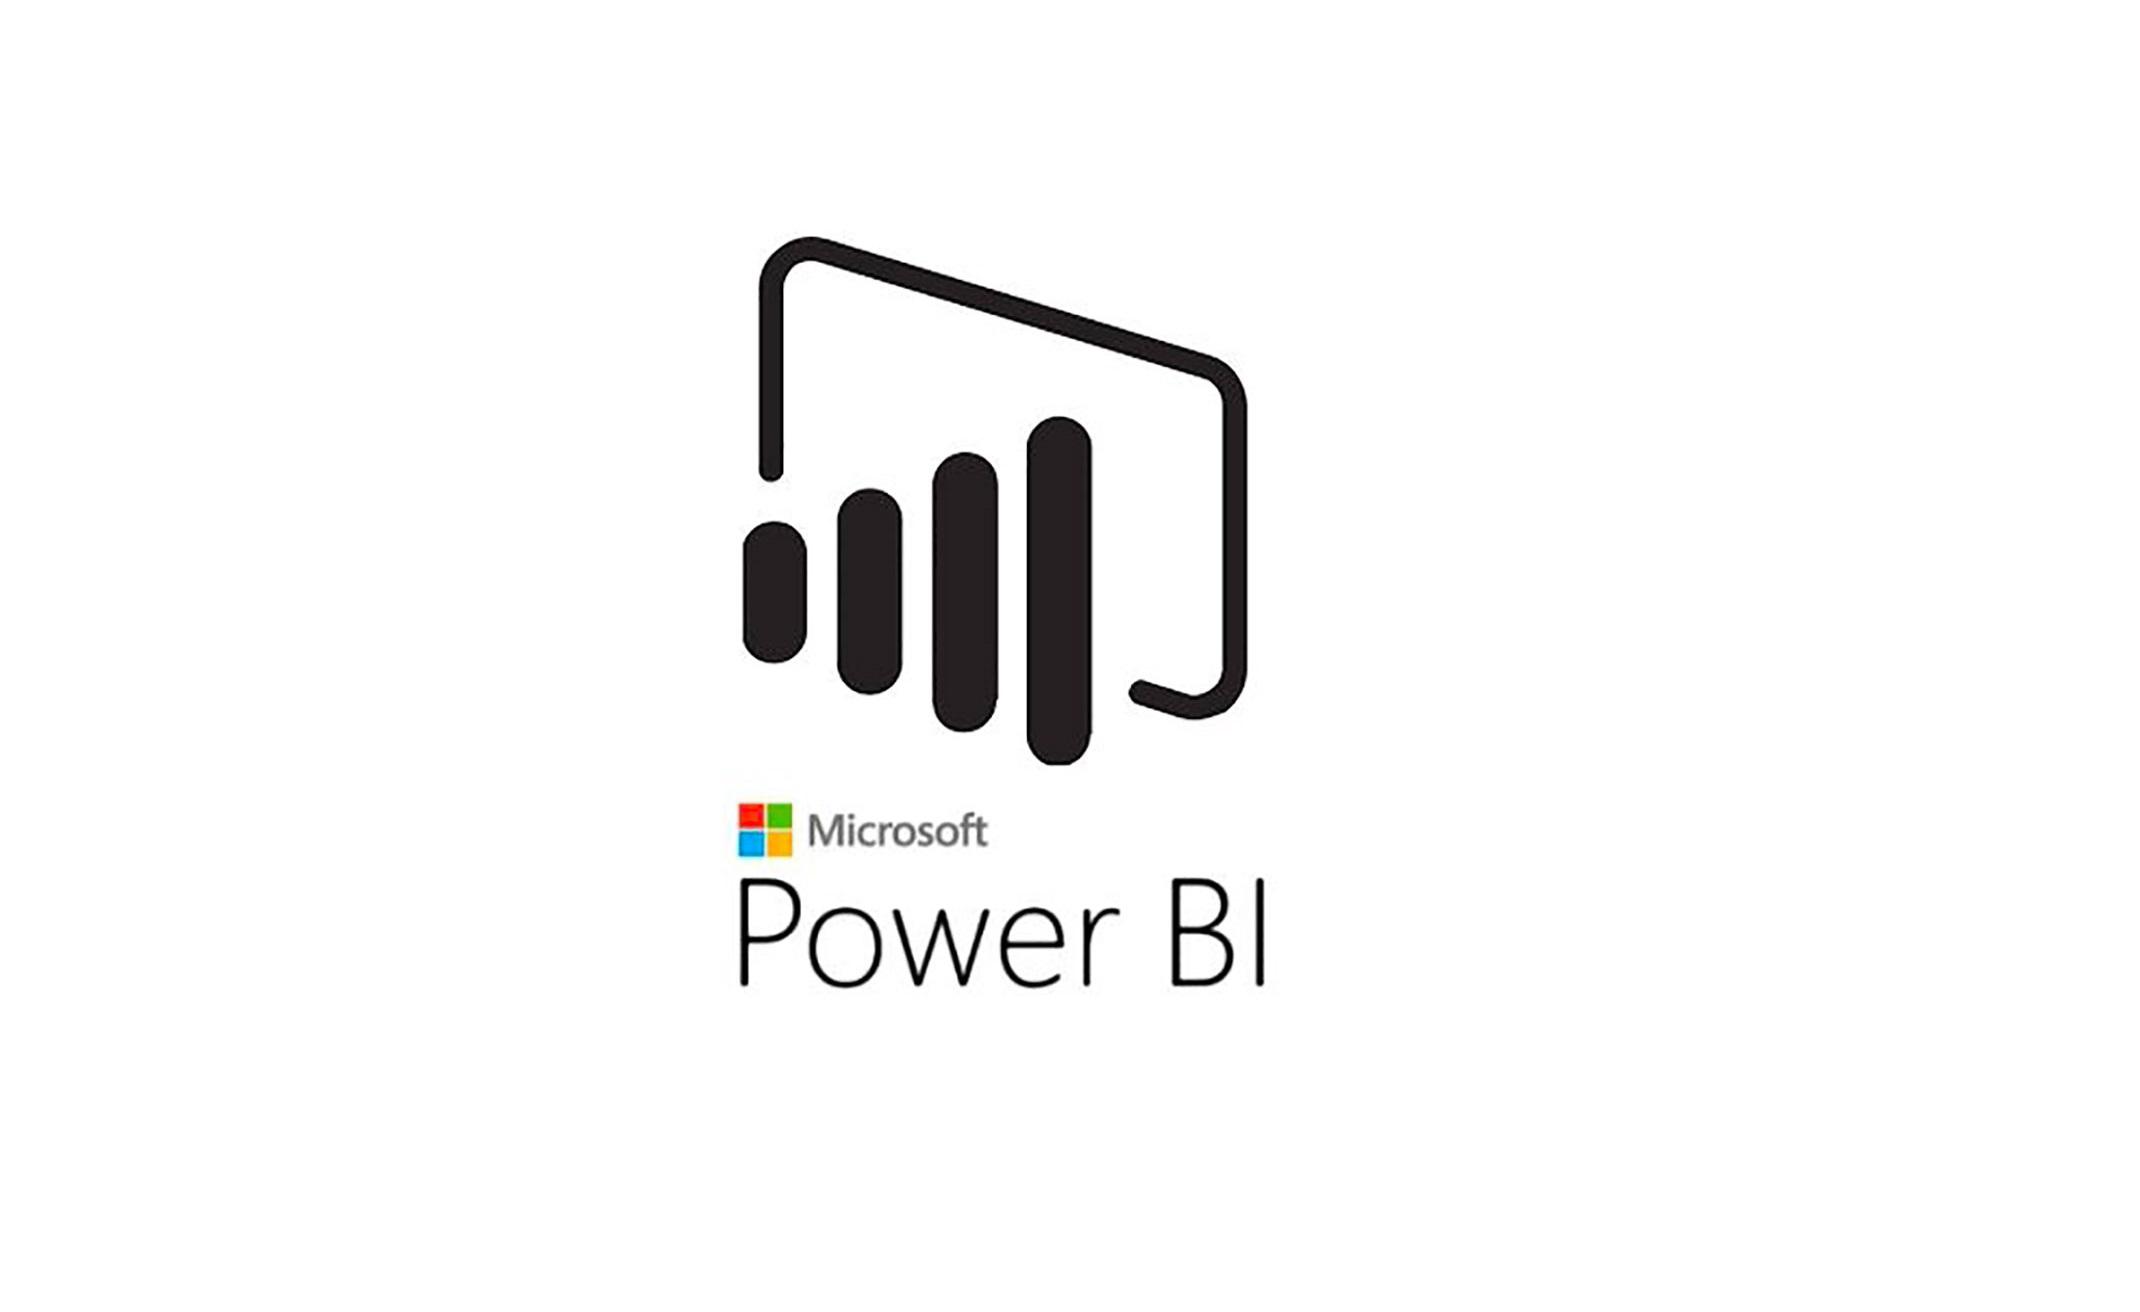 Microsoft Power BI Training in Memphis | Introduction to Power BI training for beginners | Getting started with Power BI | What is Power BI | January 20, 2020 - February 12, 2020